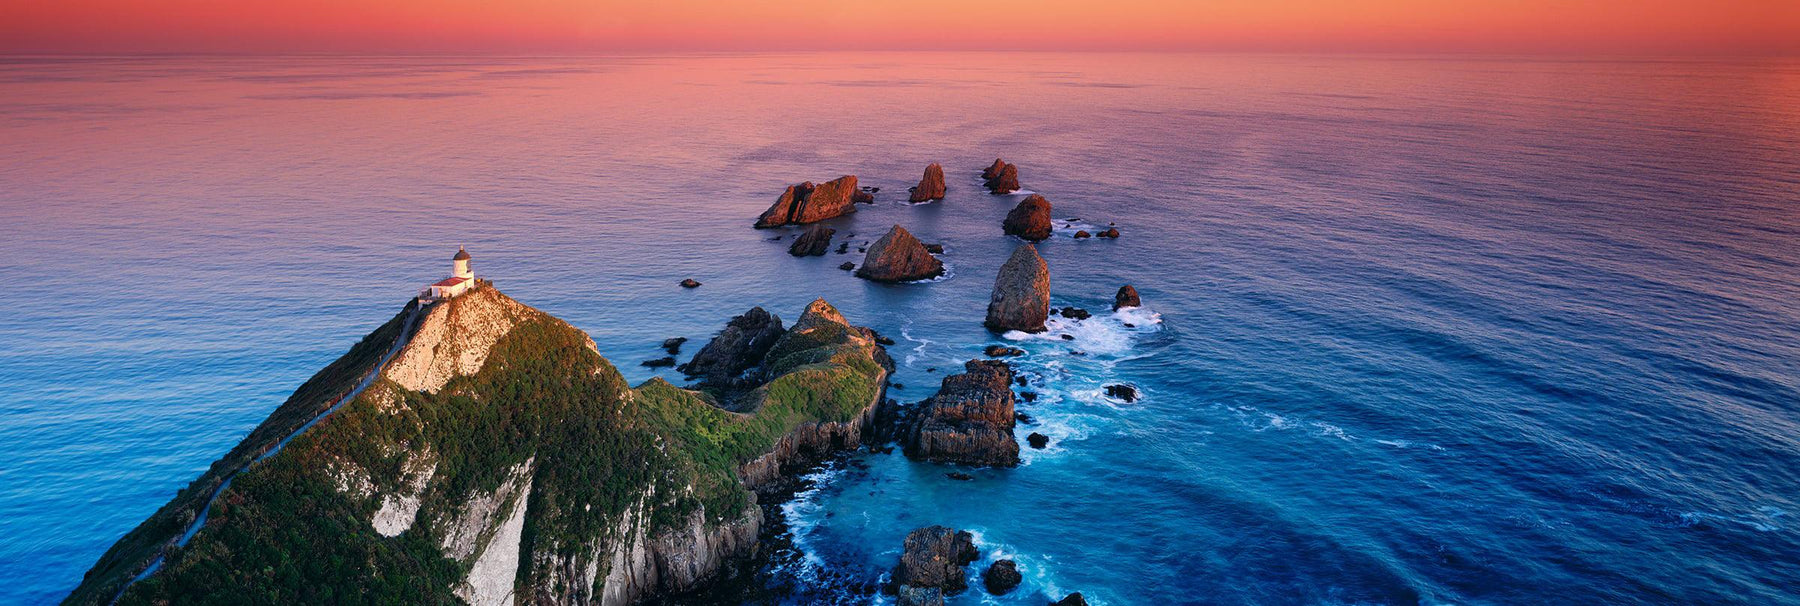 View looking down on Nugget Point Lighthouse that sits on a cliff overlooking the Catlins coast in New Zealand